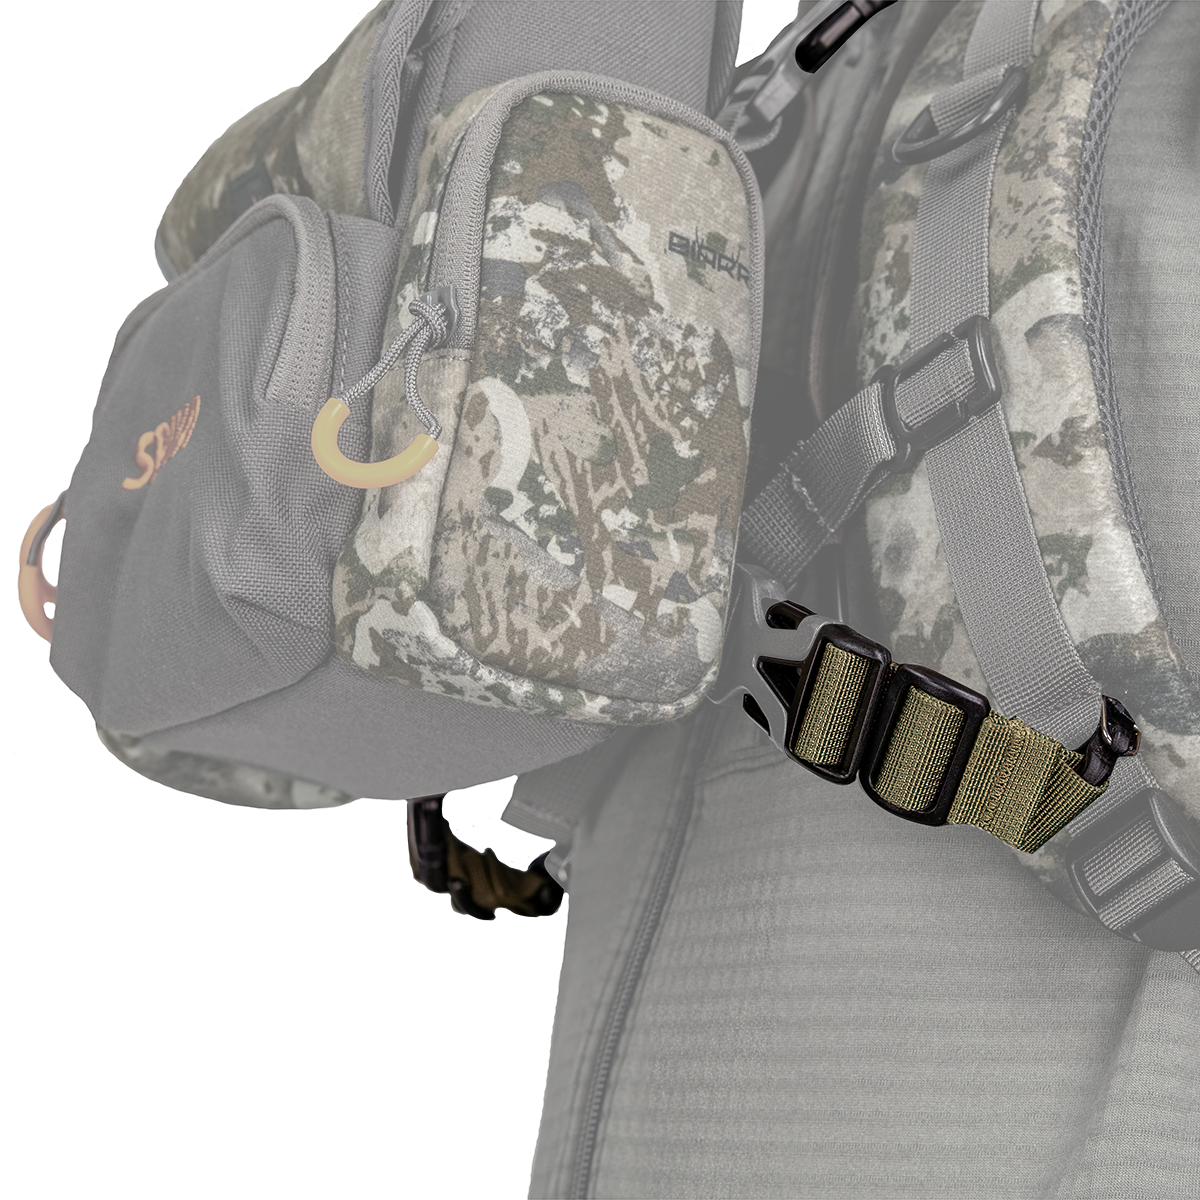 Spika Drover Bino Pack Connecting Straps -  - Mansfield Hunting & Fishing - Products to prepare for Corona Virus